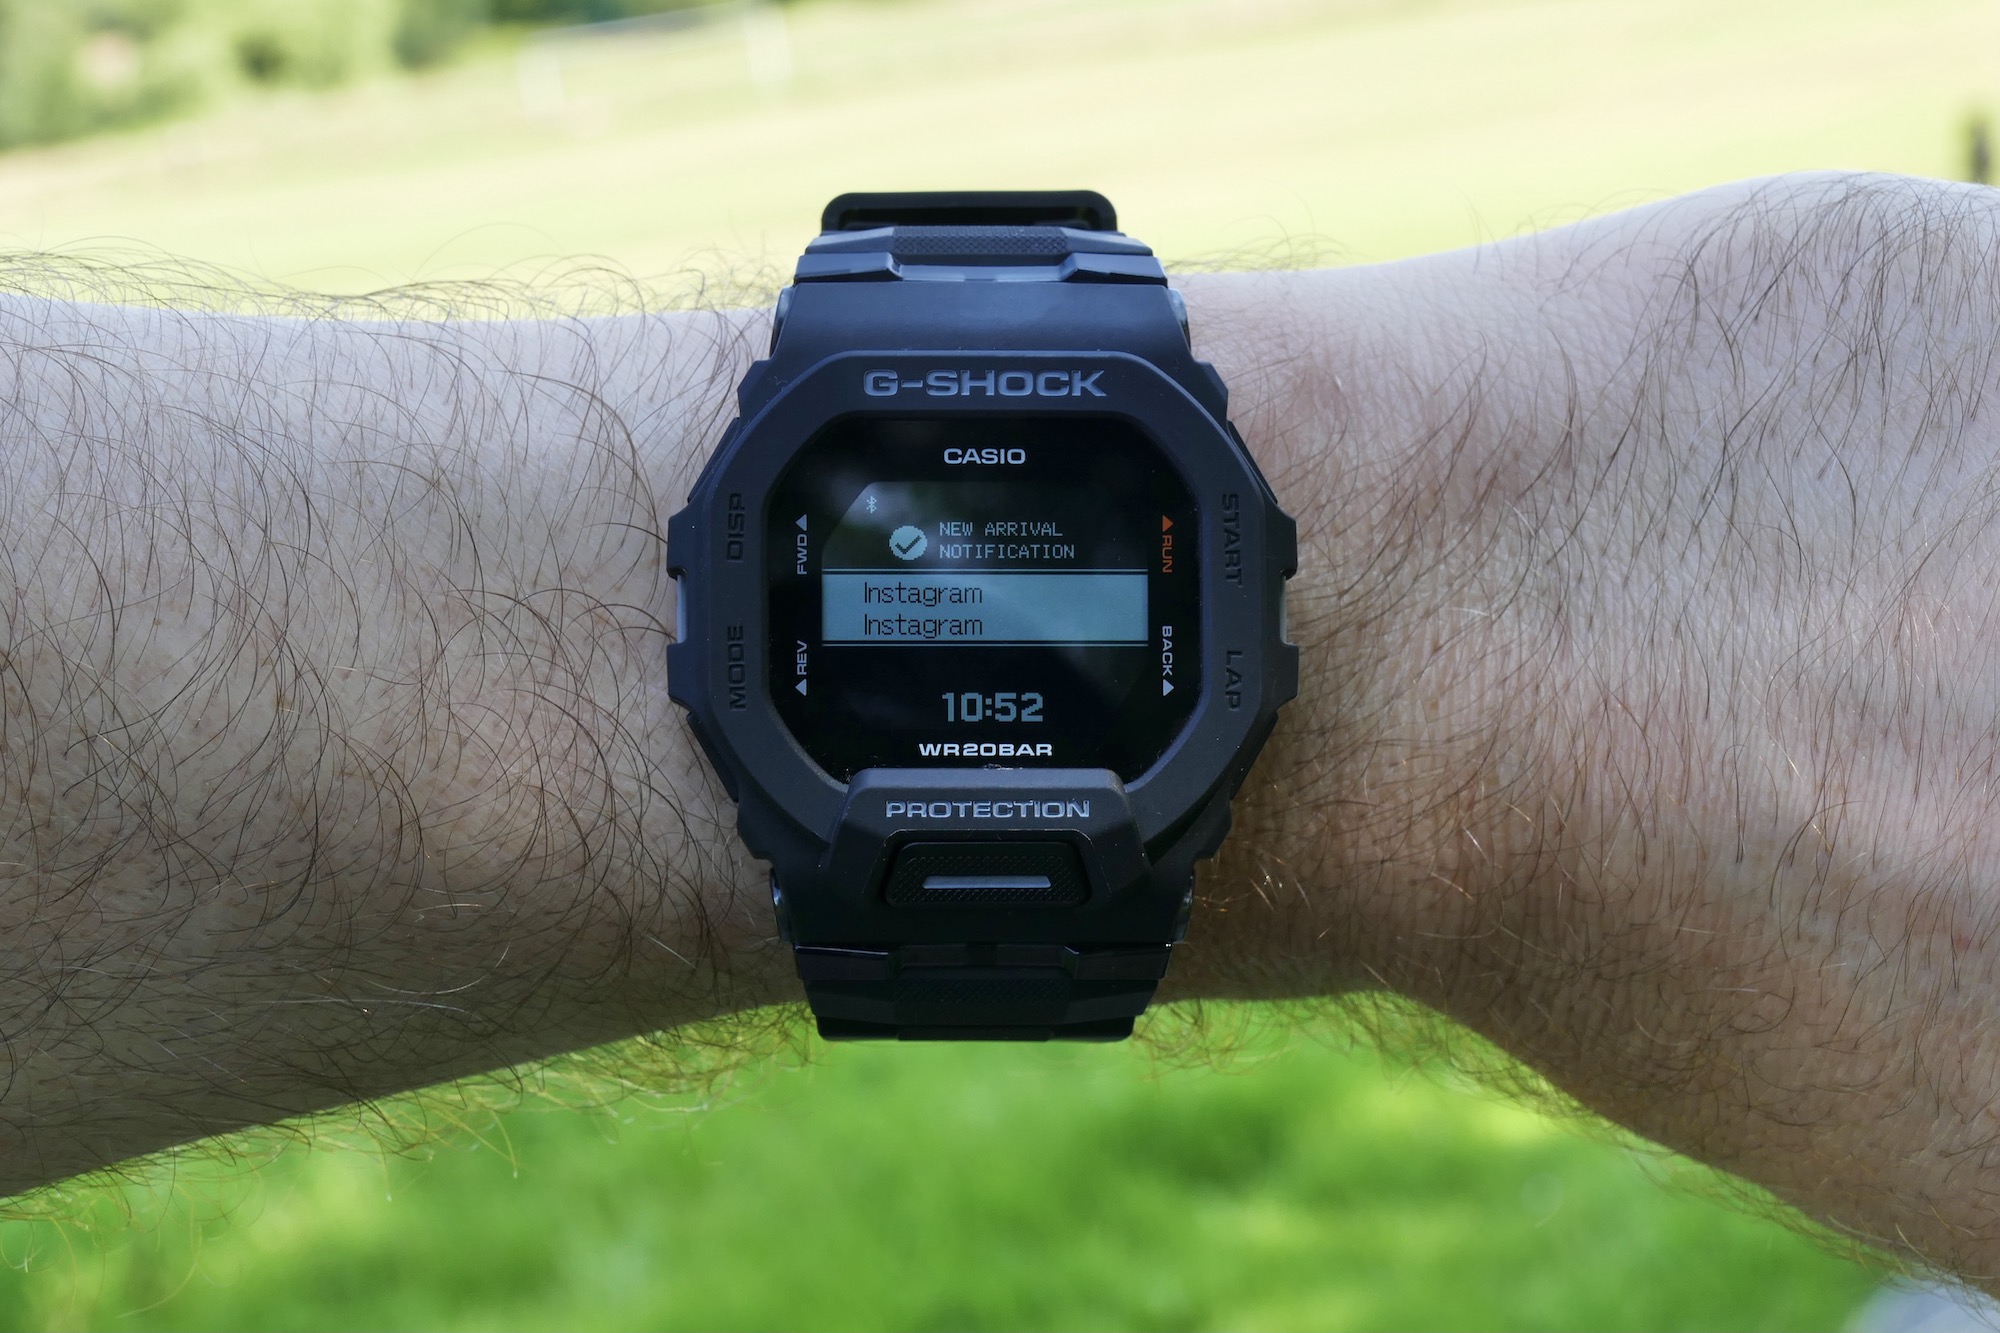 Incoming notification on the Casio G-Shock GBD-200.